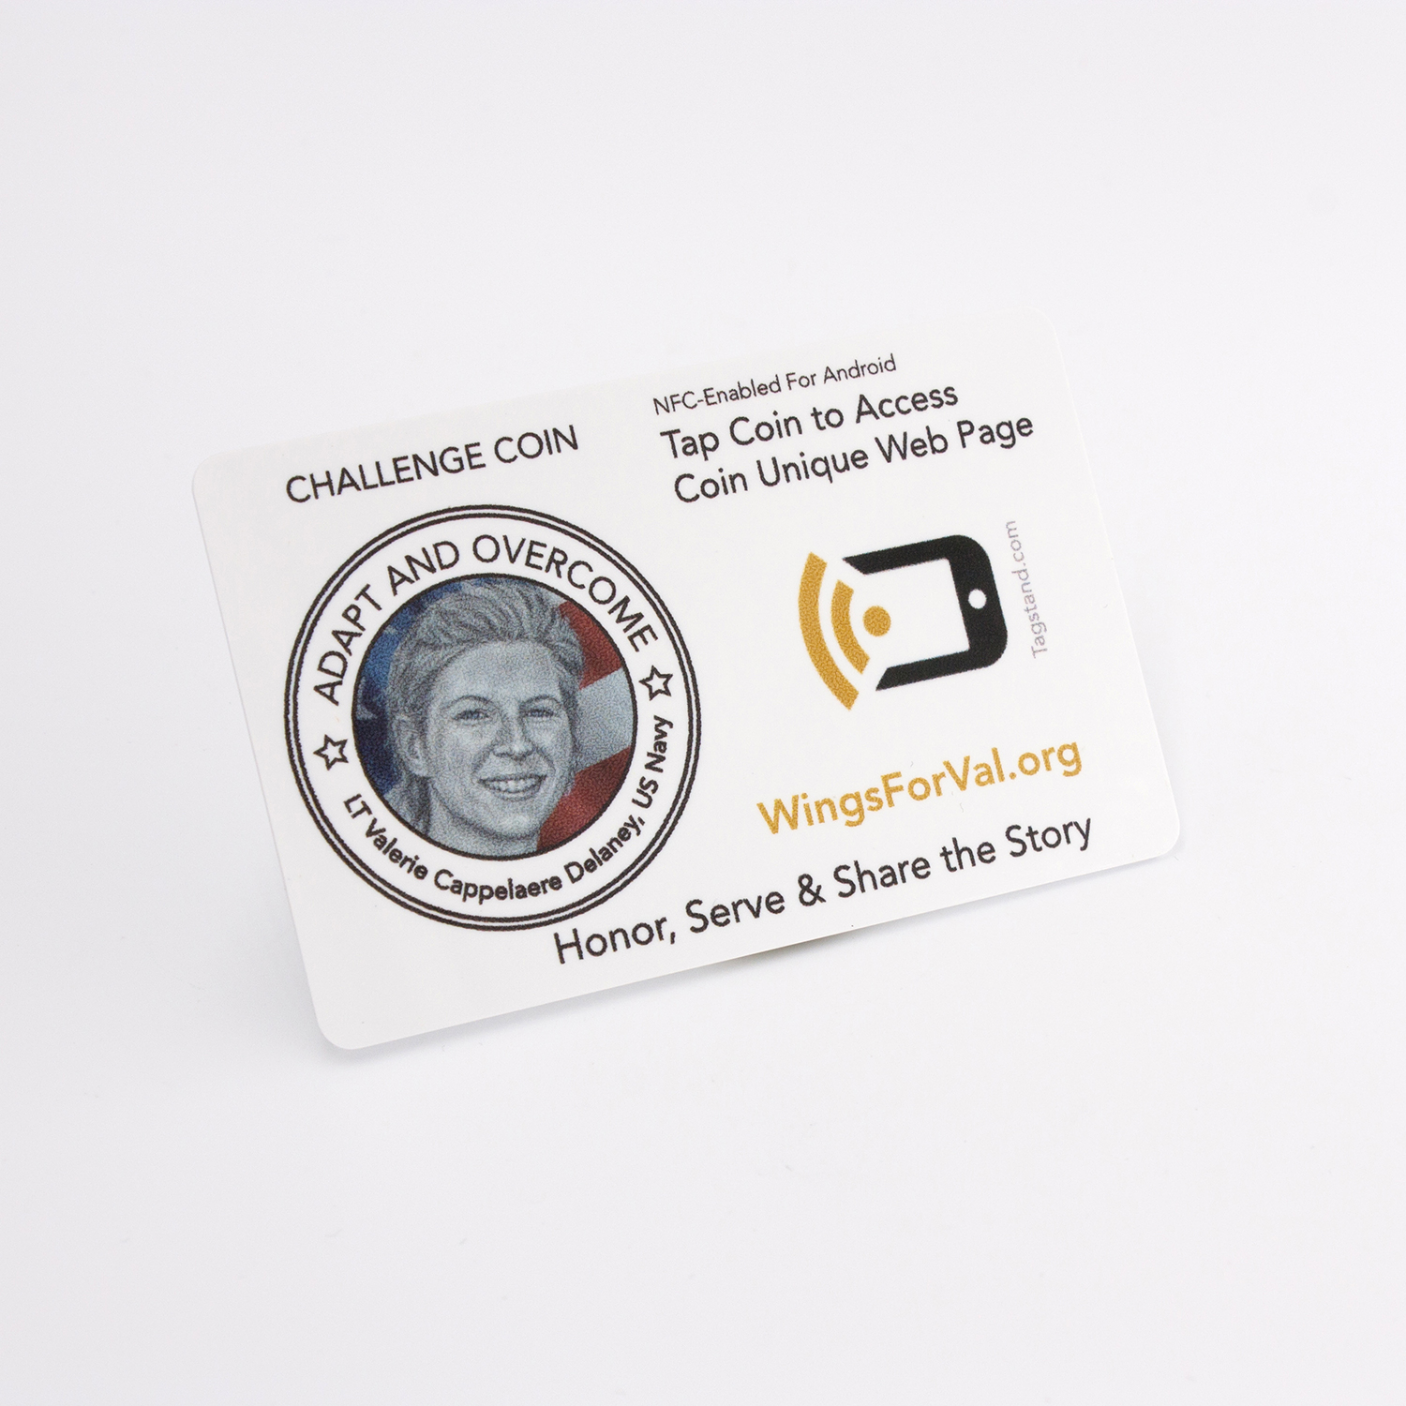 NFC card encoded with a website